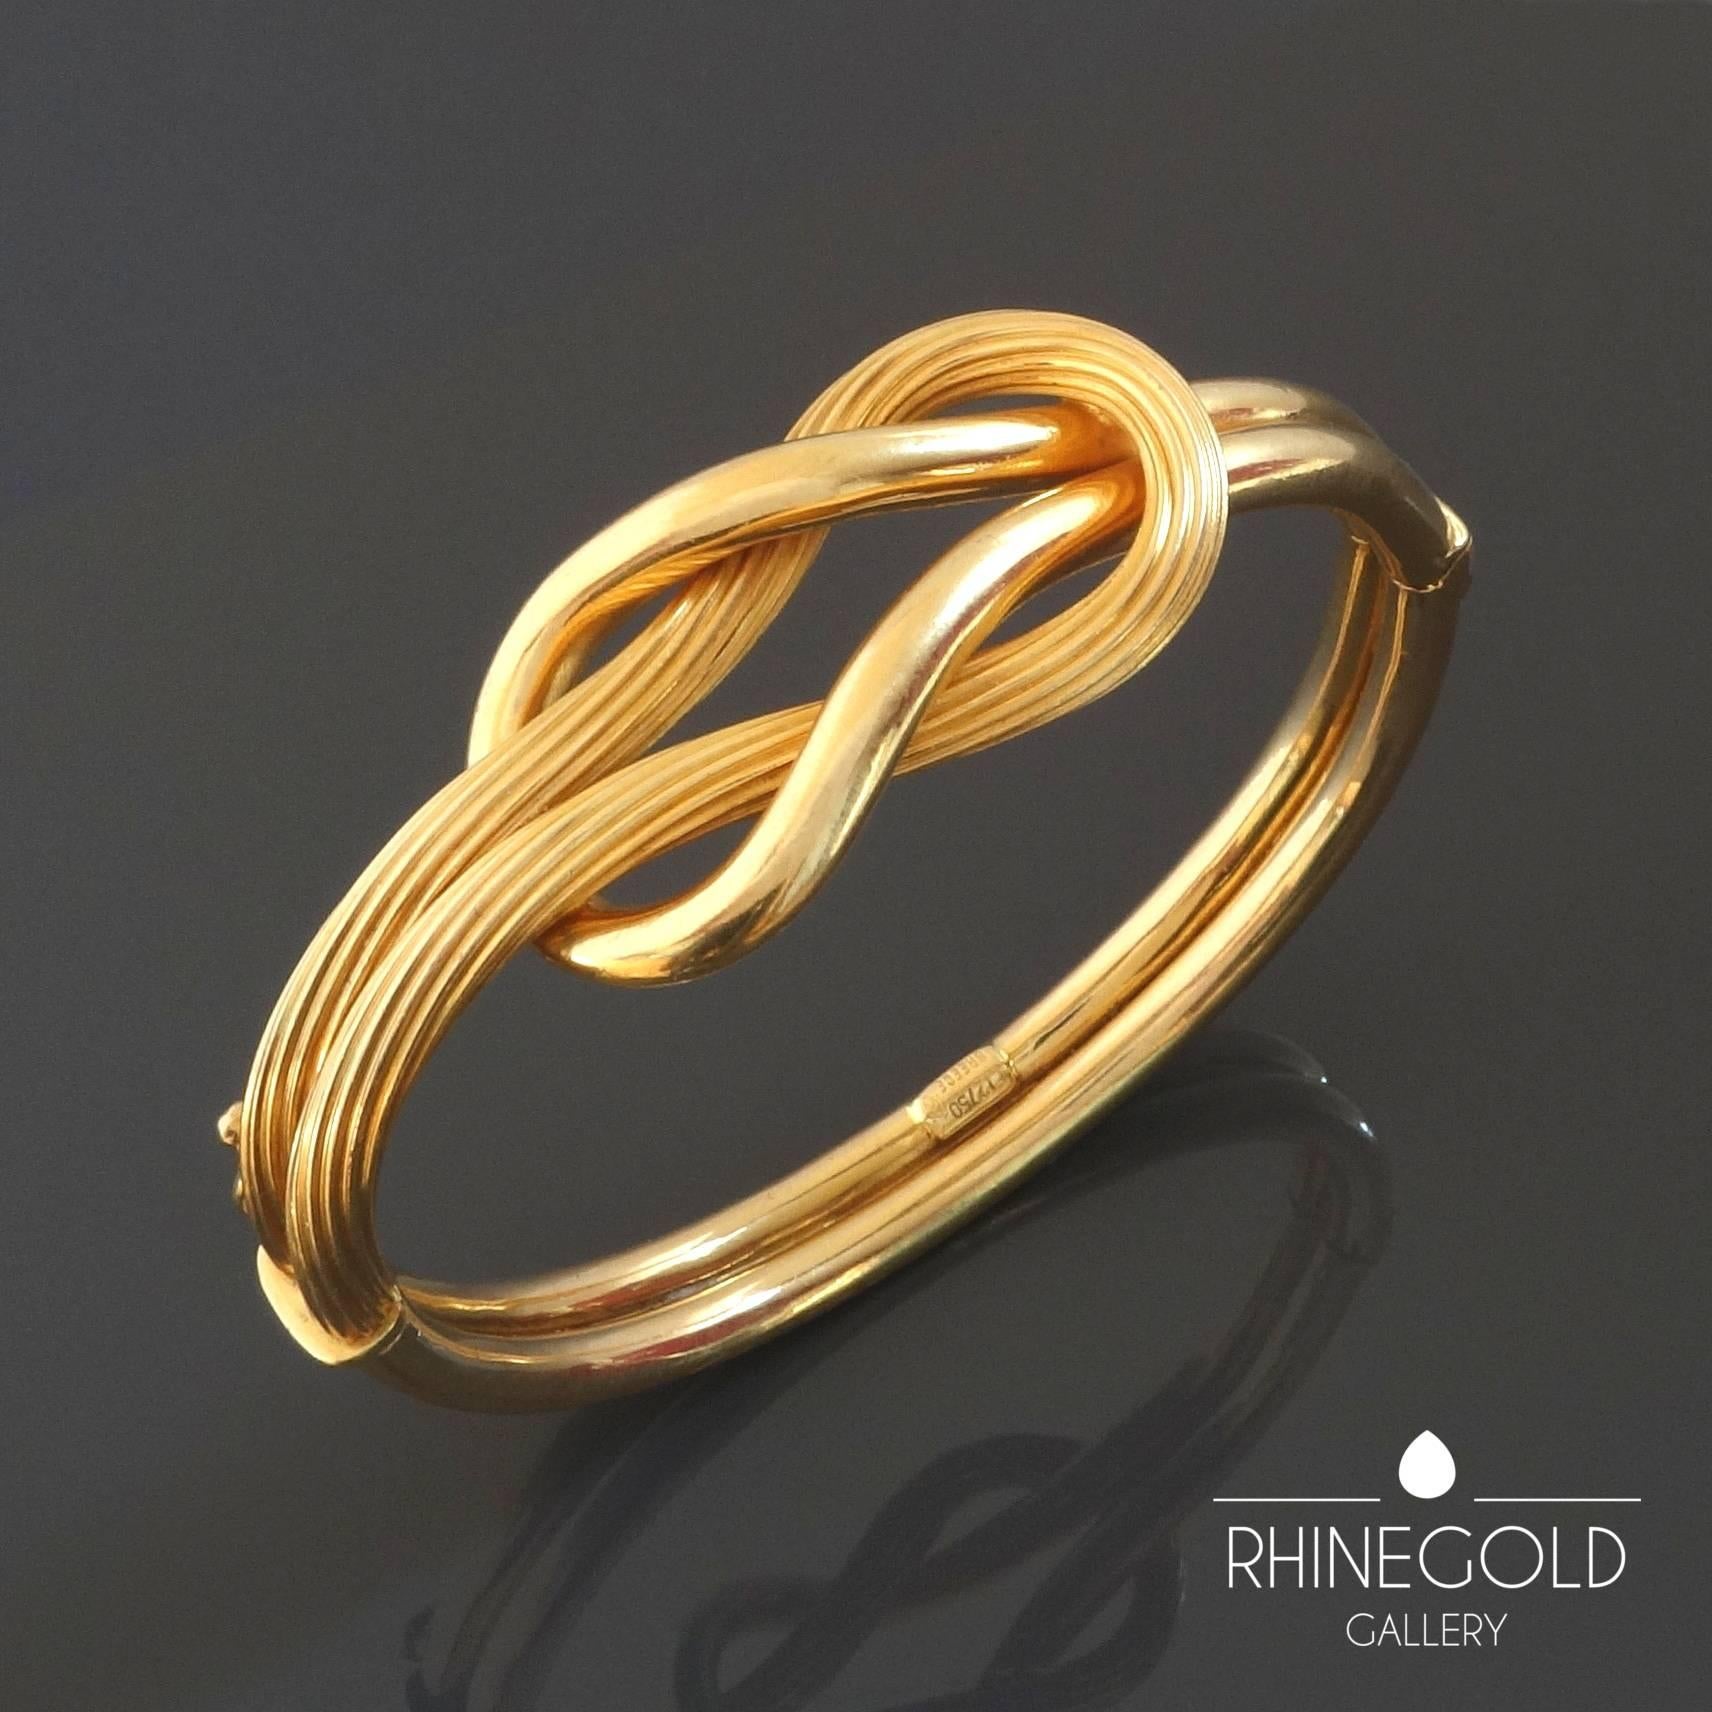 Ilias Lalaounis Classic Modern Gold Knot Bracelet 
18k yellow gold, weight approx. 27 grams
Inner diameter approx. 5.9 cm to 5.0 cm (approx. 2 5/16